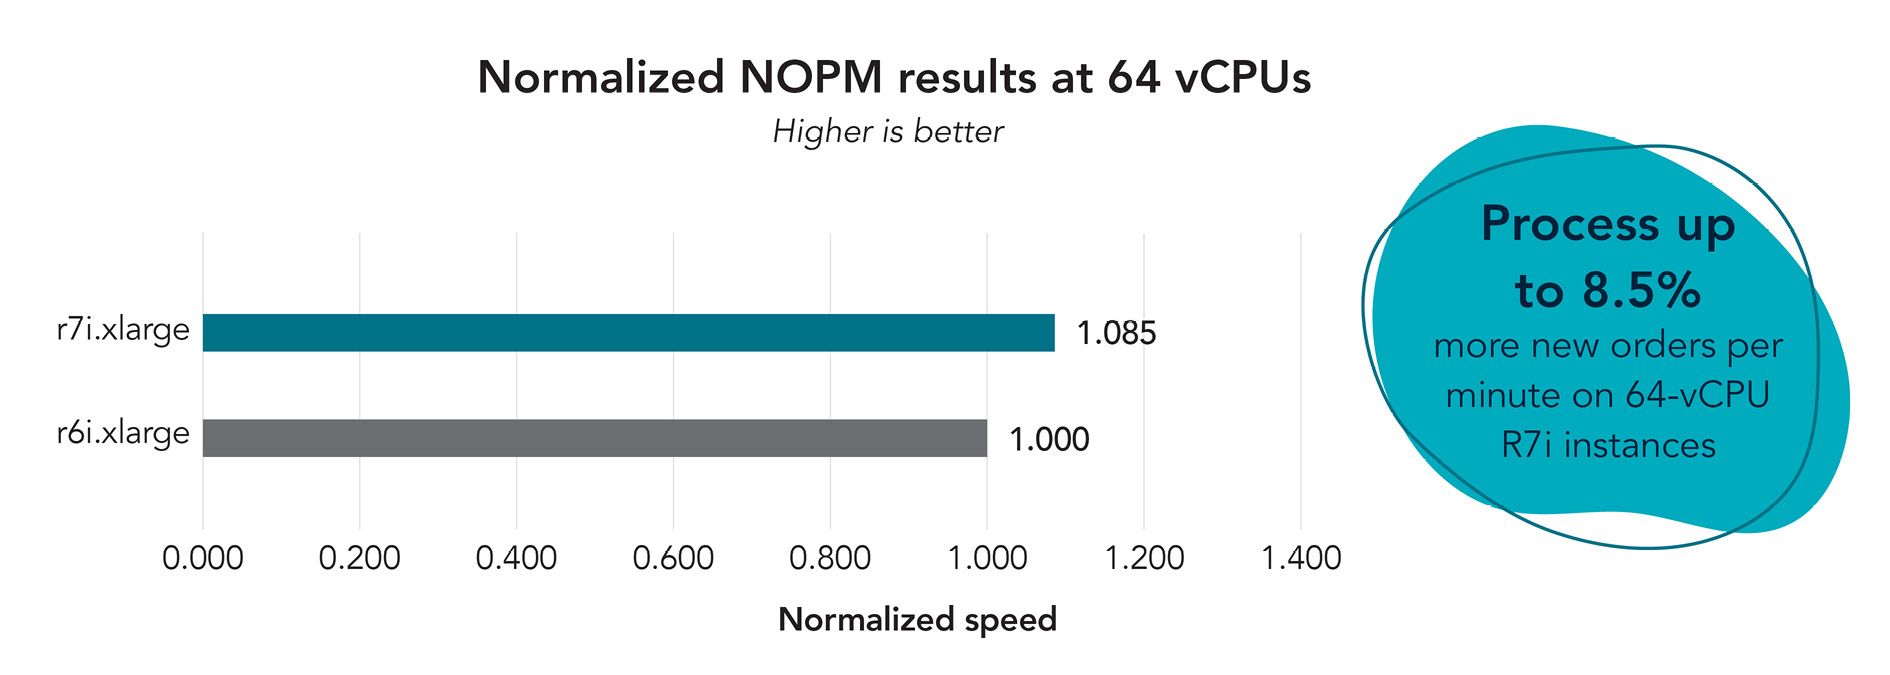 Bar graph showing the normalized results at 64 vCPUs. The r7i.xlarge instance achieved 8.5 percent more new orders per minute.